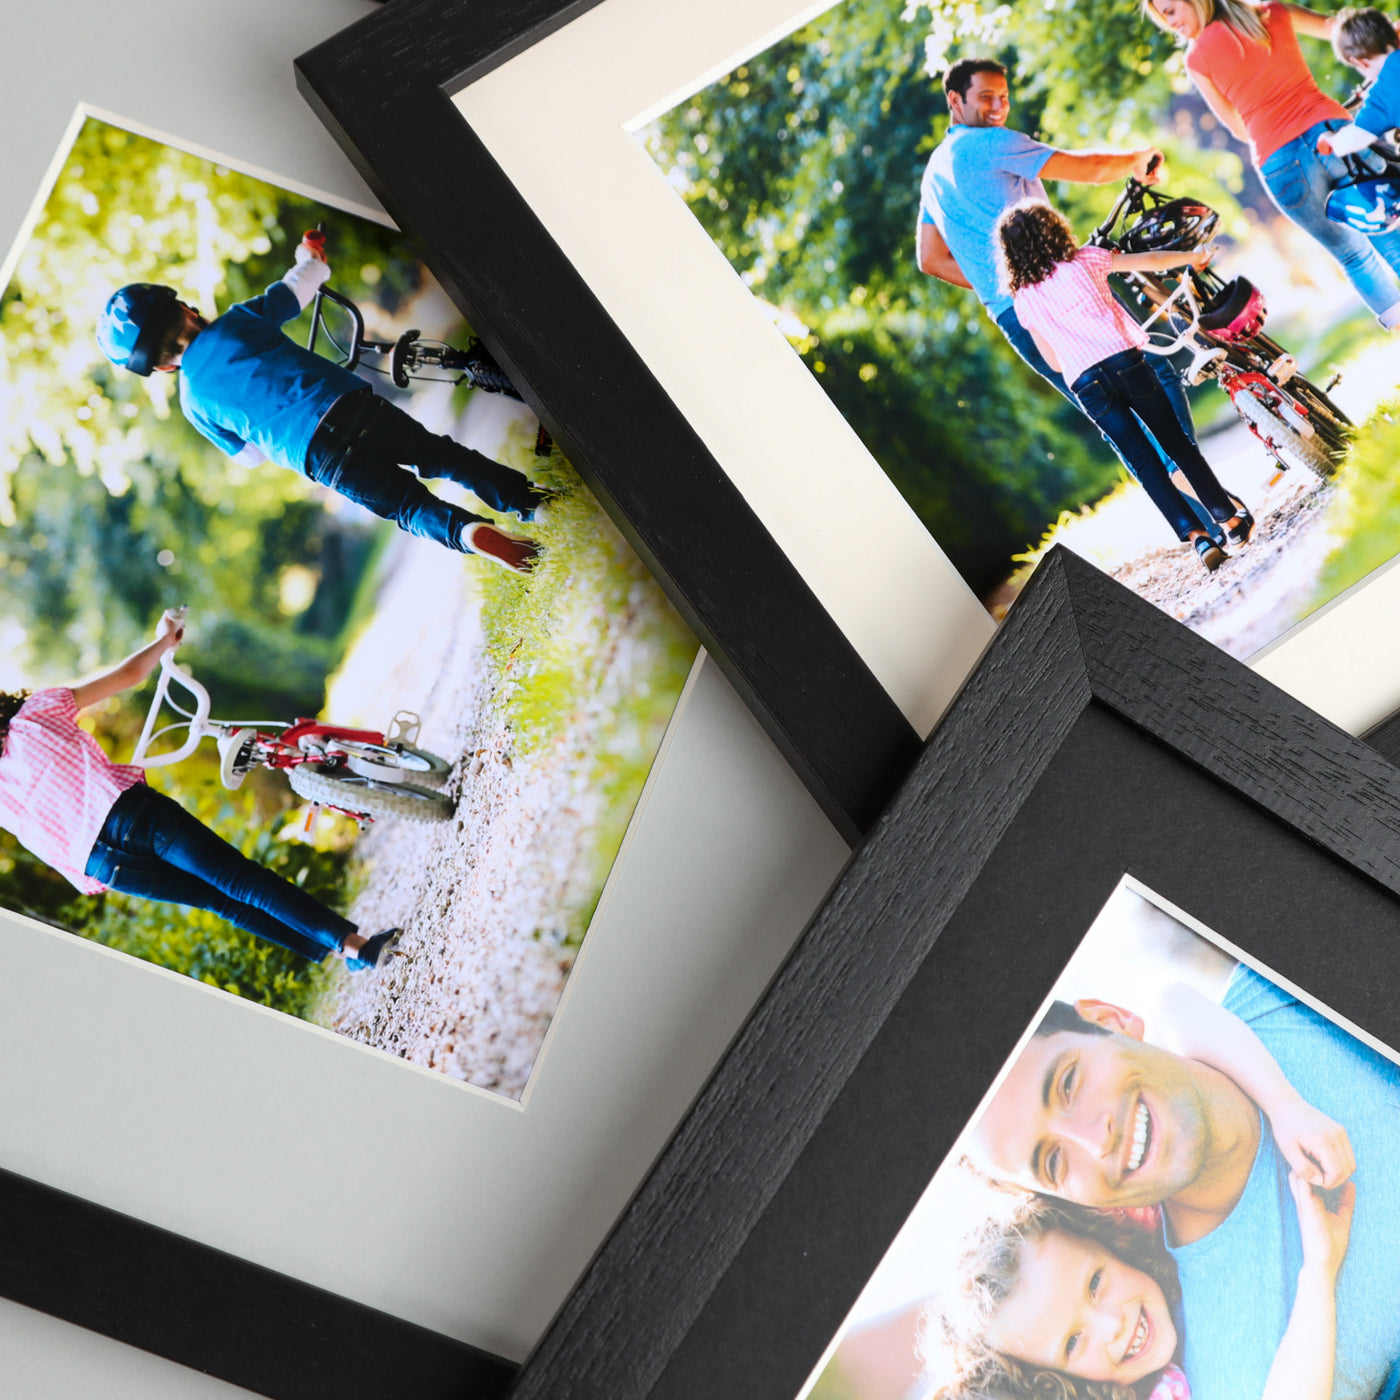 8x6 Classic Black Picture Frame with a 6x4 Mount